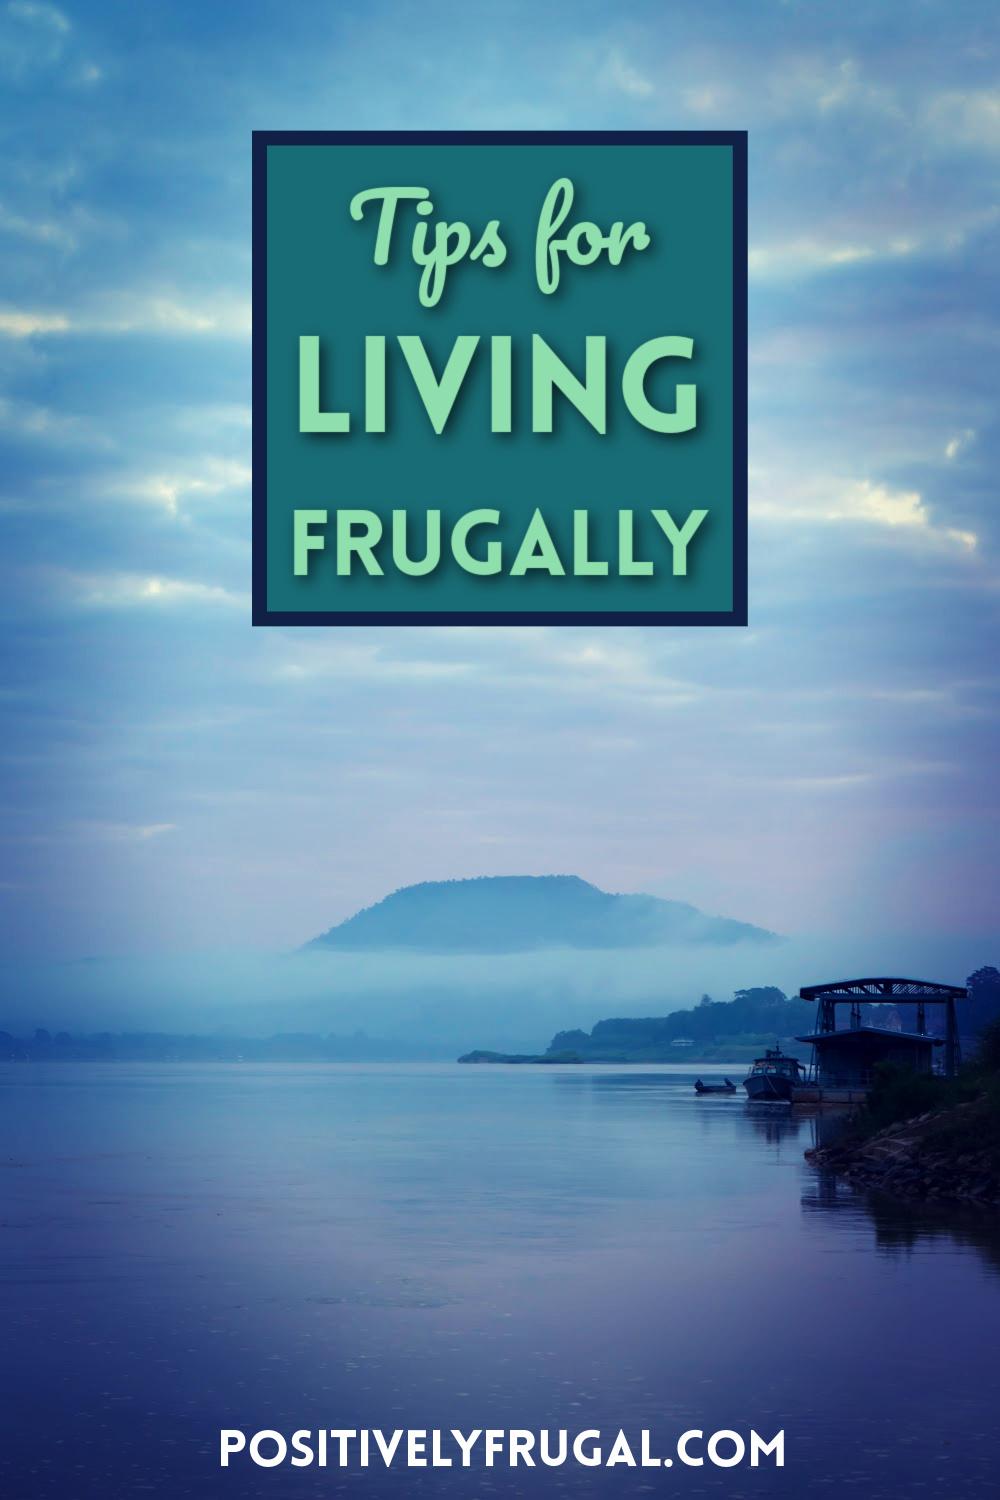 Tips for Living Frugally by PositivelyFrugal.com